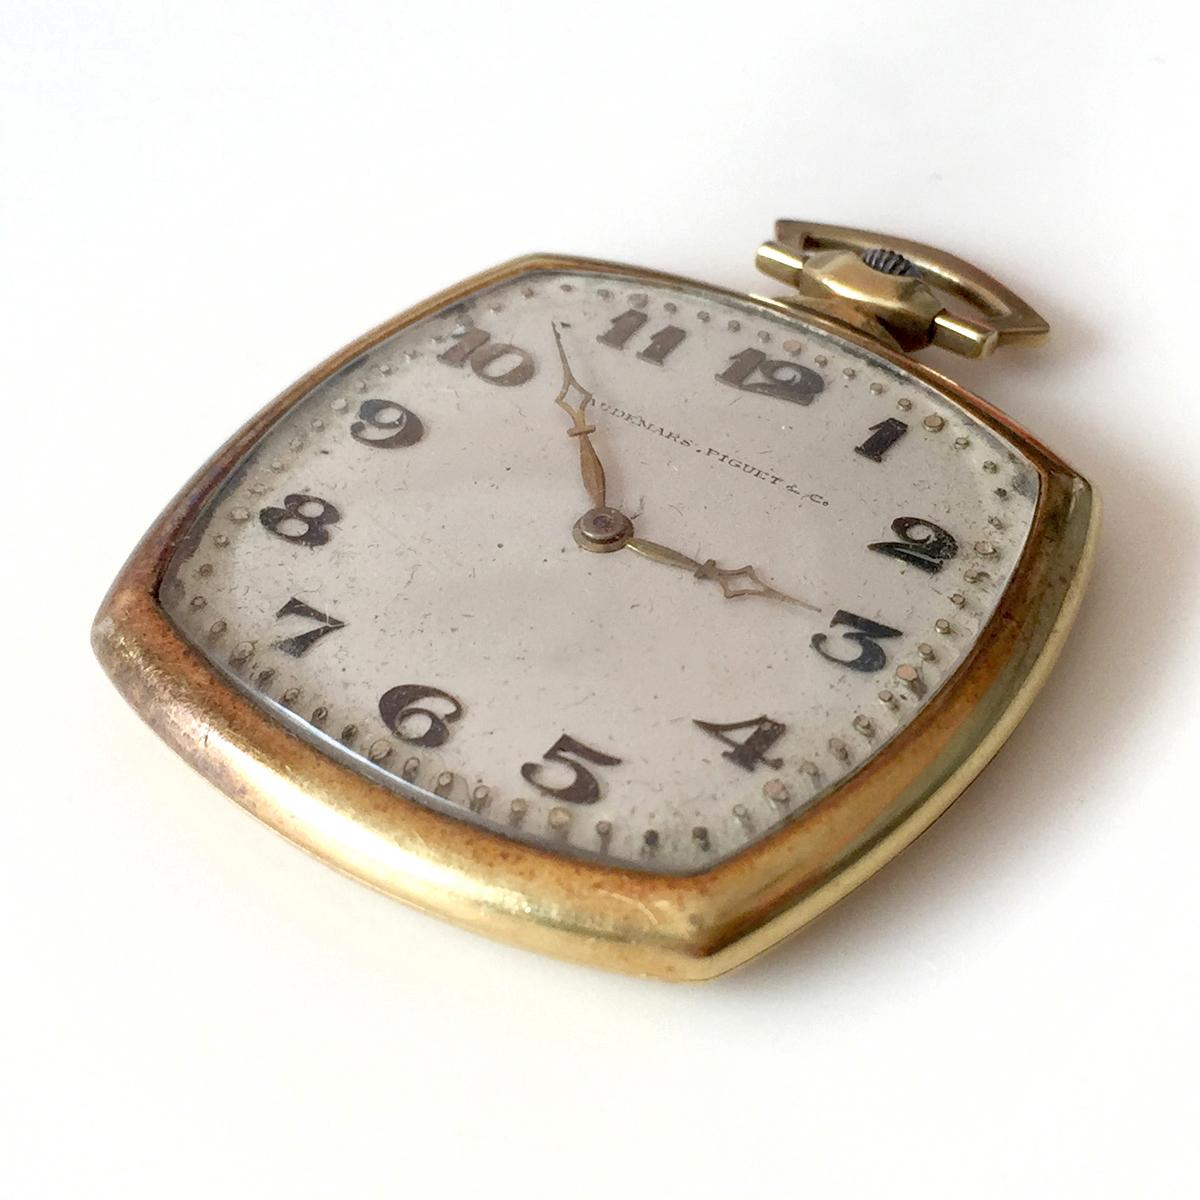 Vintage 18kt gold cushion square open face AUDEMARS PIGUET & Co. pocket watch In Fair Condition For Sale In Miami, FL